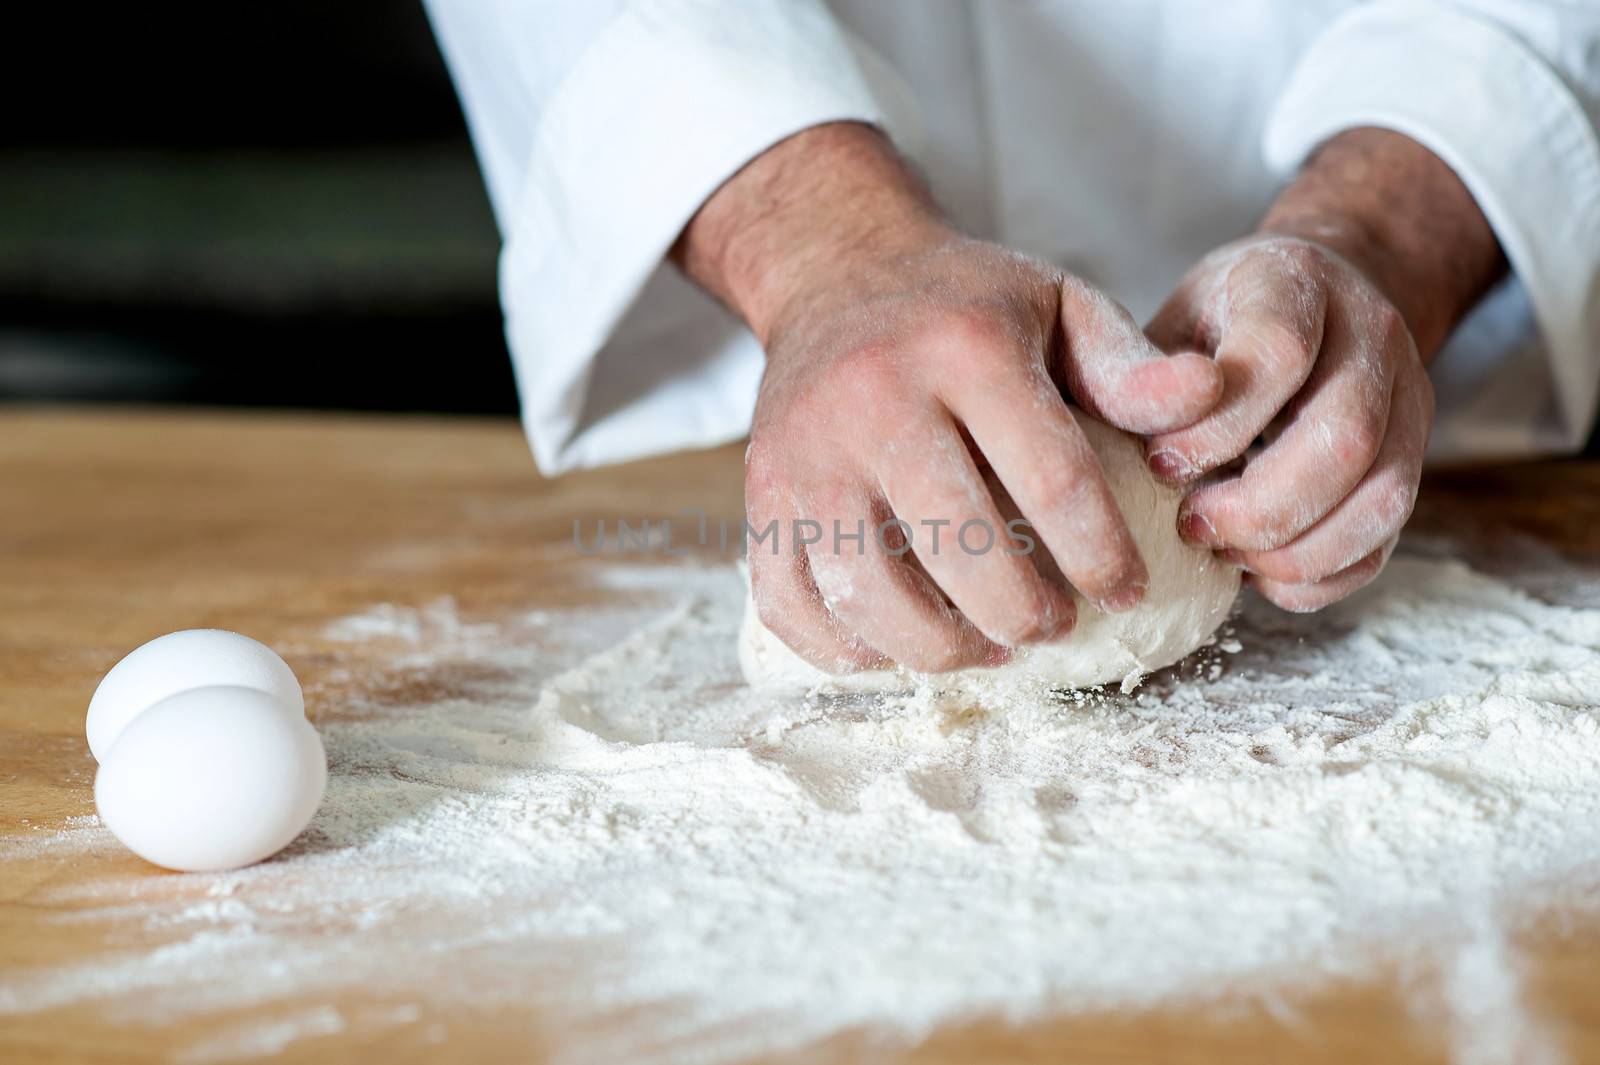 Human hands kneading dough with eggs beside